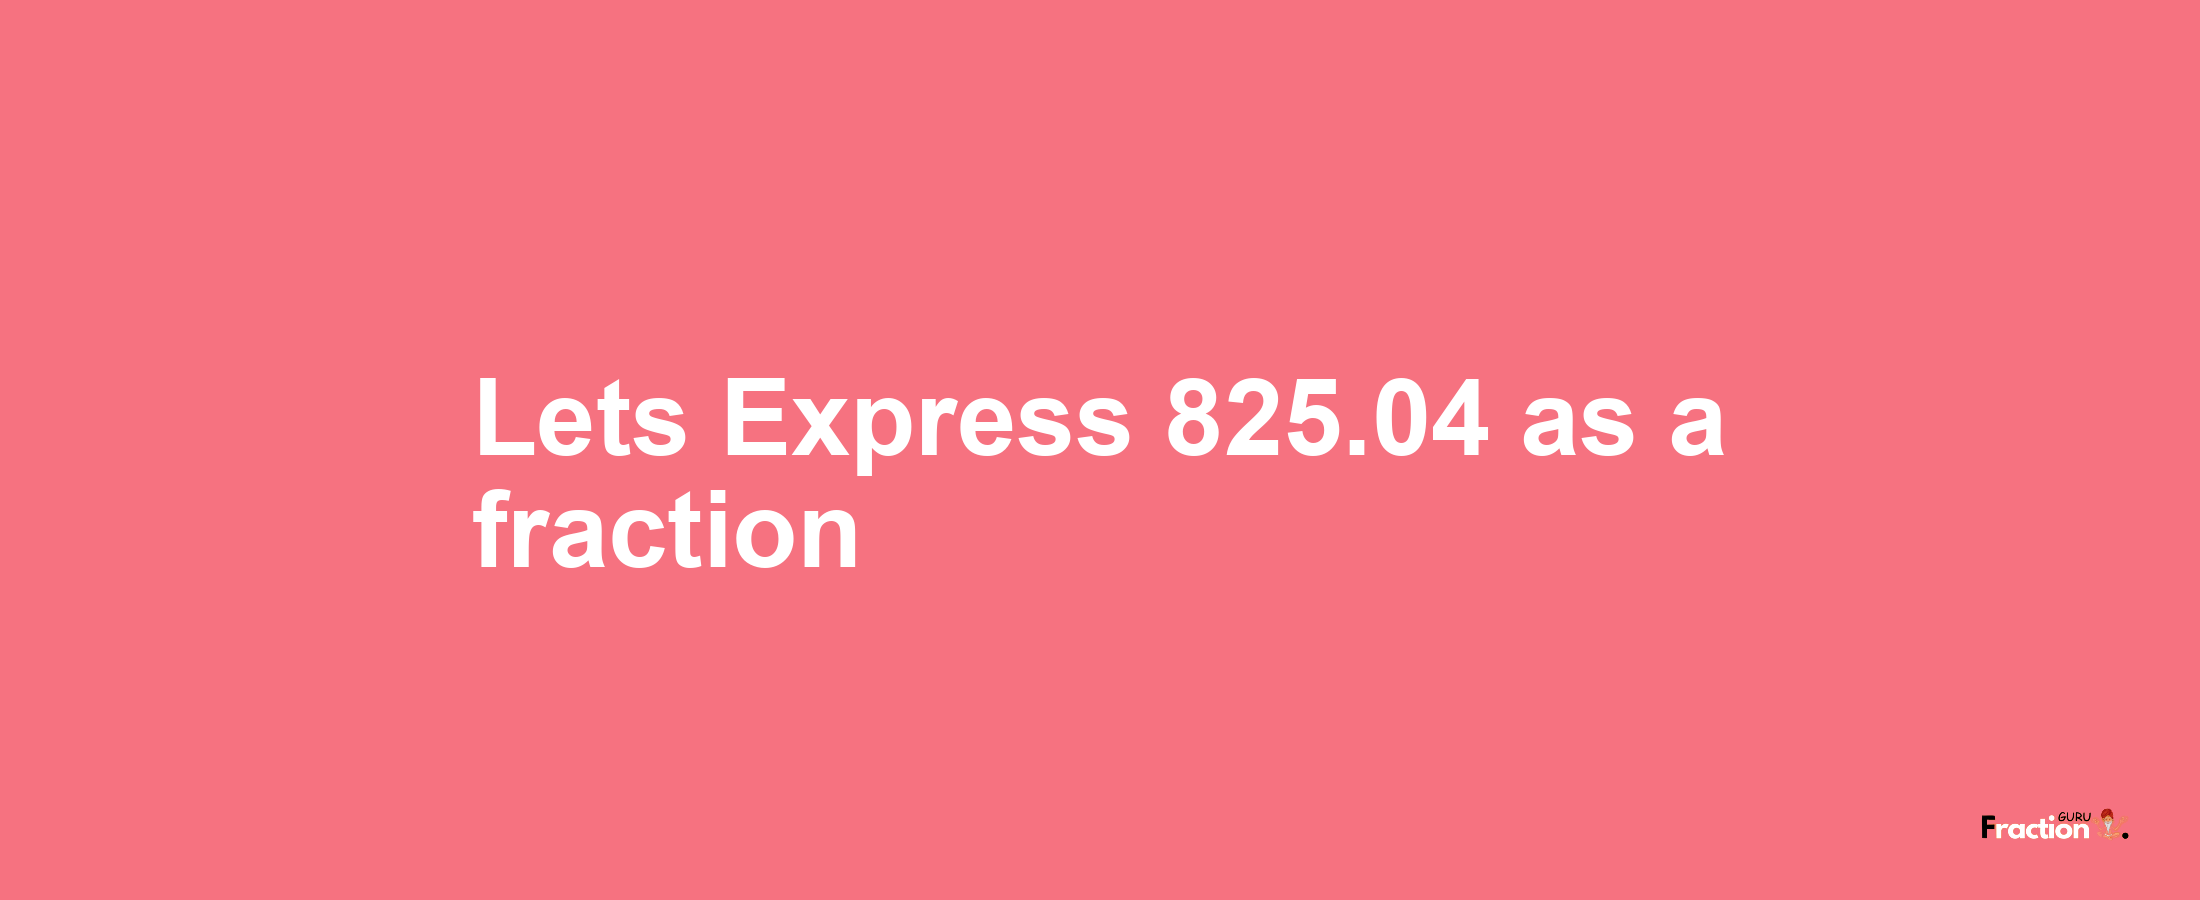 Lets Express 825.04 as afraction